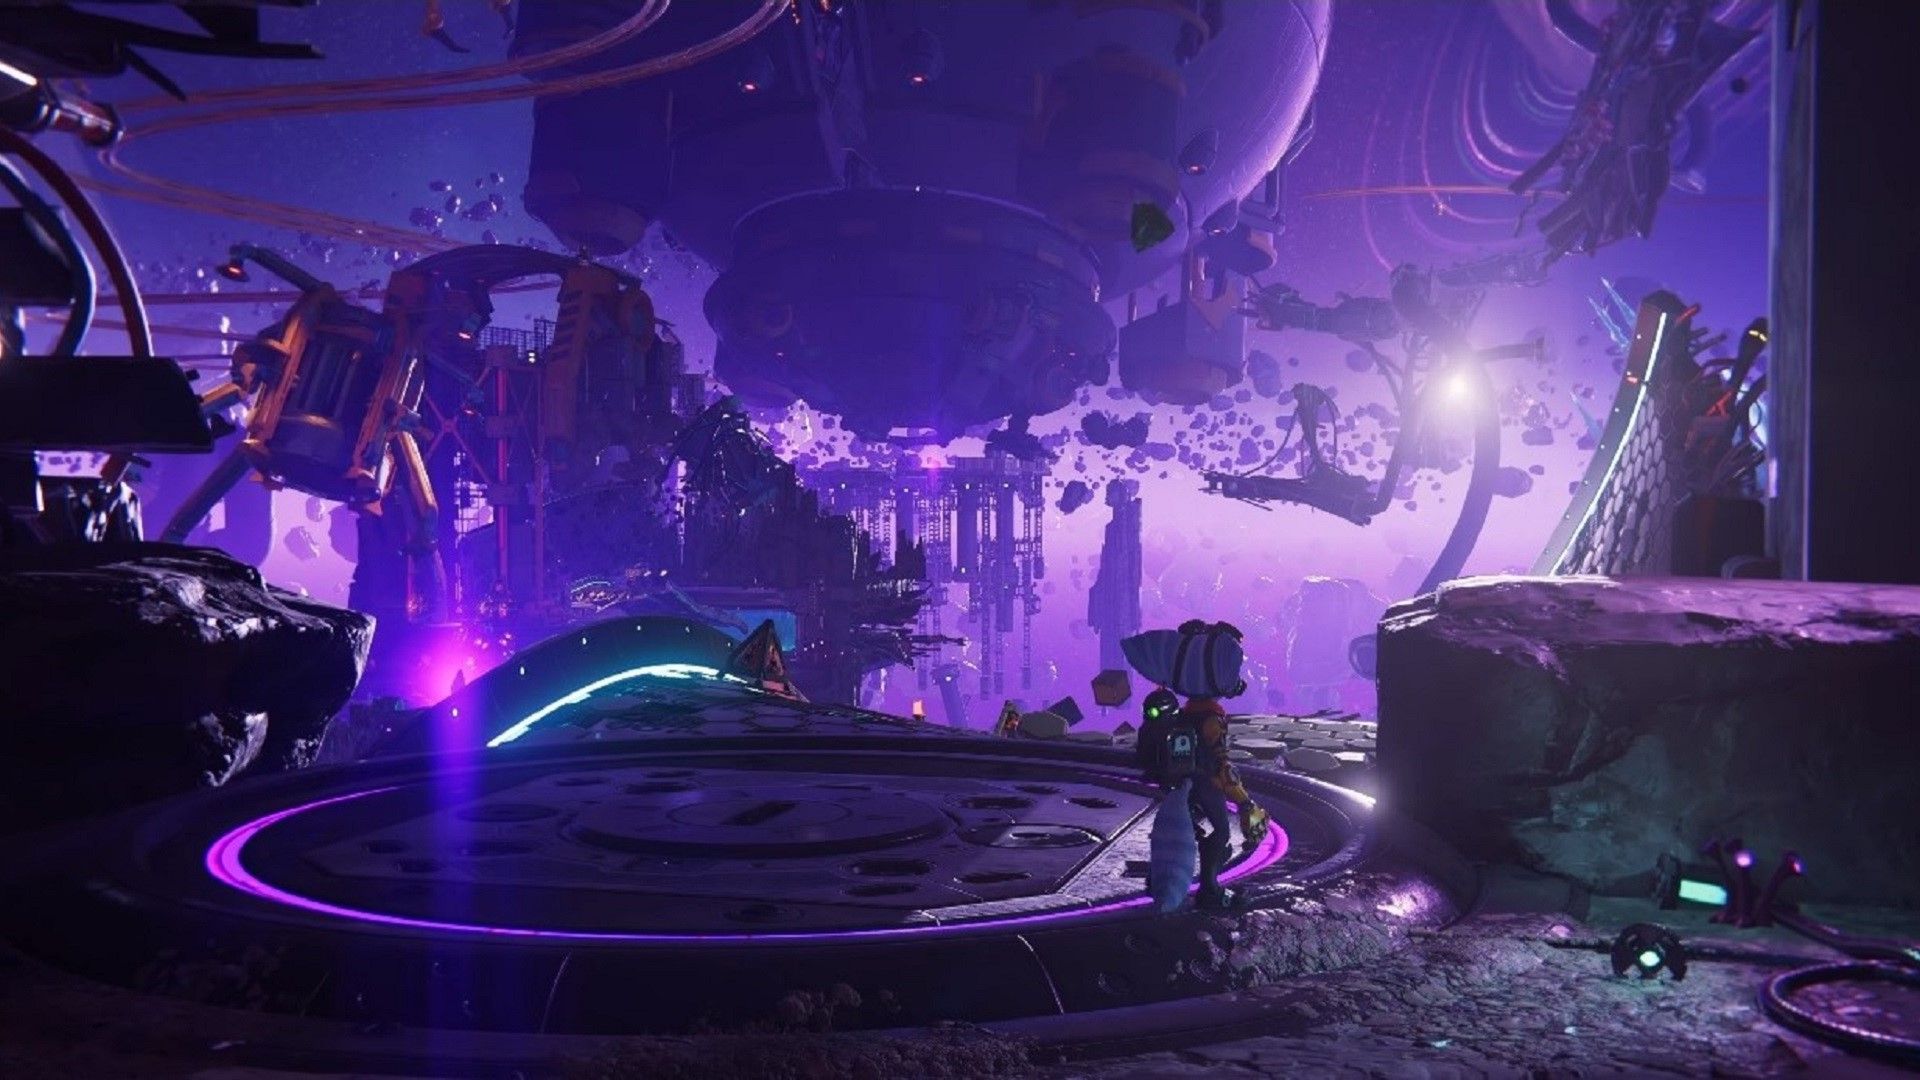 Ratchet and Clank: Rift Apart's Streaming Tech Allows for “More Density, Content and Quality in Every Corner”